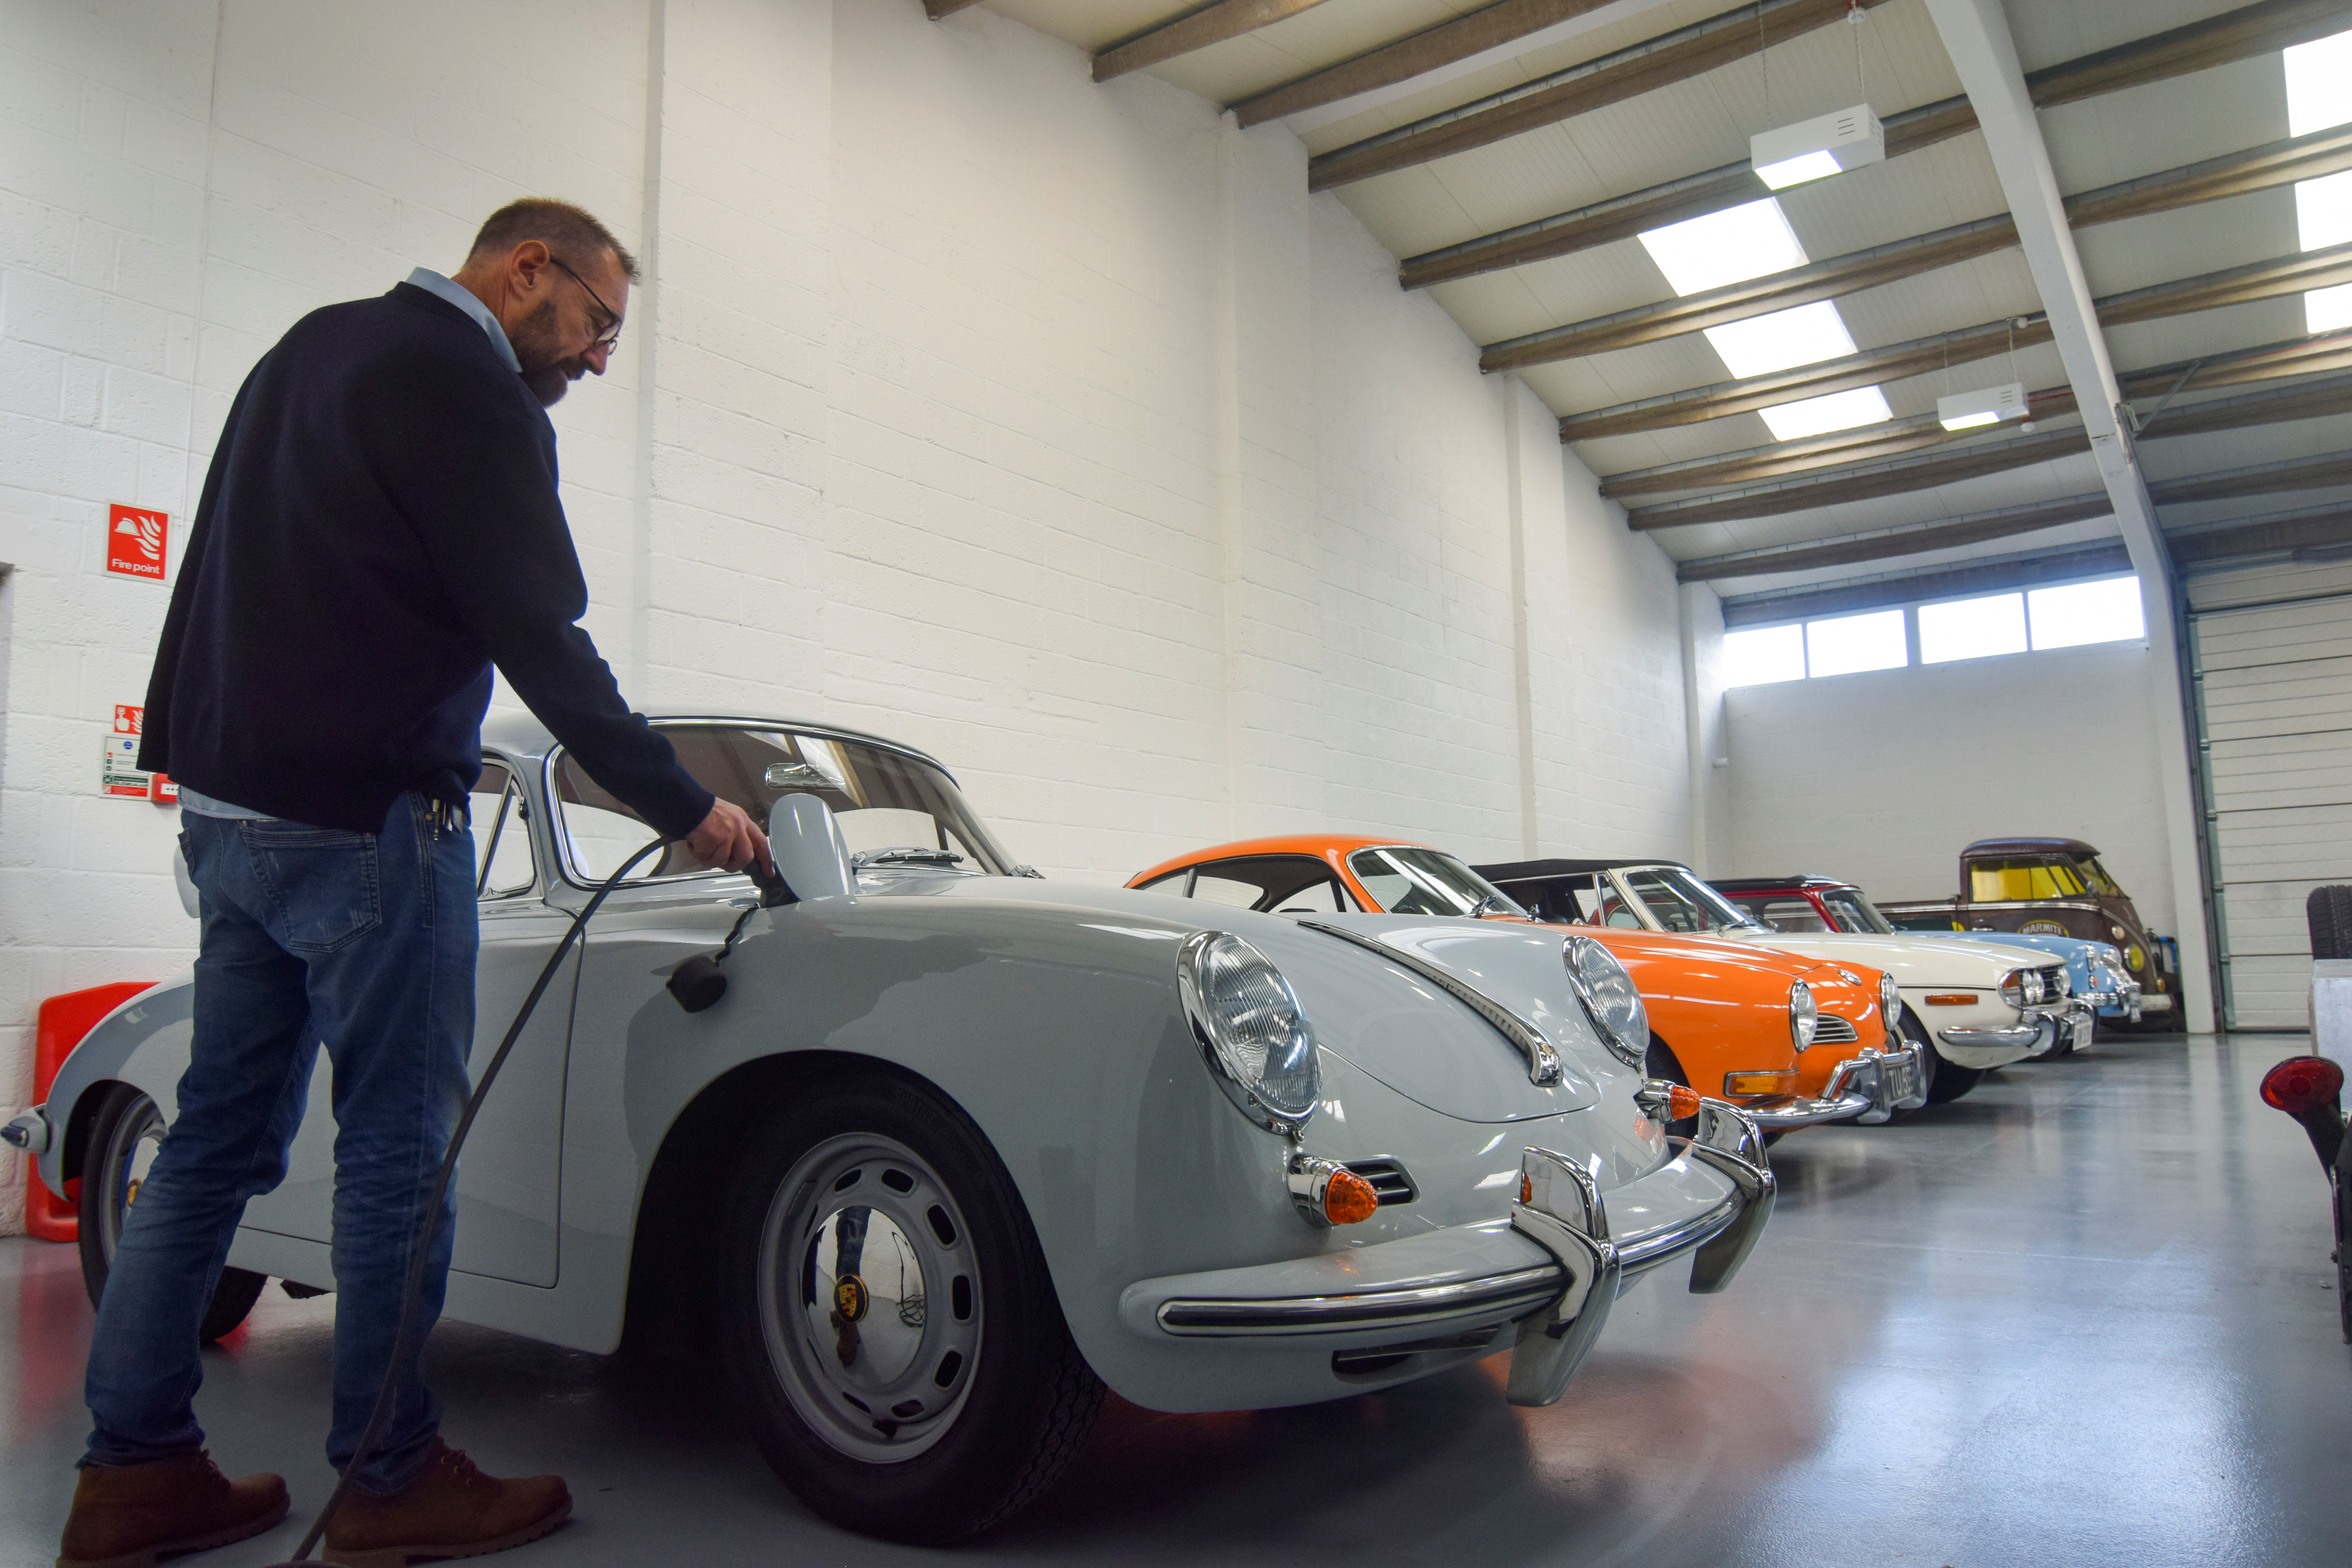 Steve Drummond, co-founder of Electrogenic plugs a converted Porsche into a charger, in Kidlington